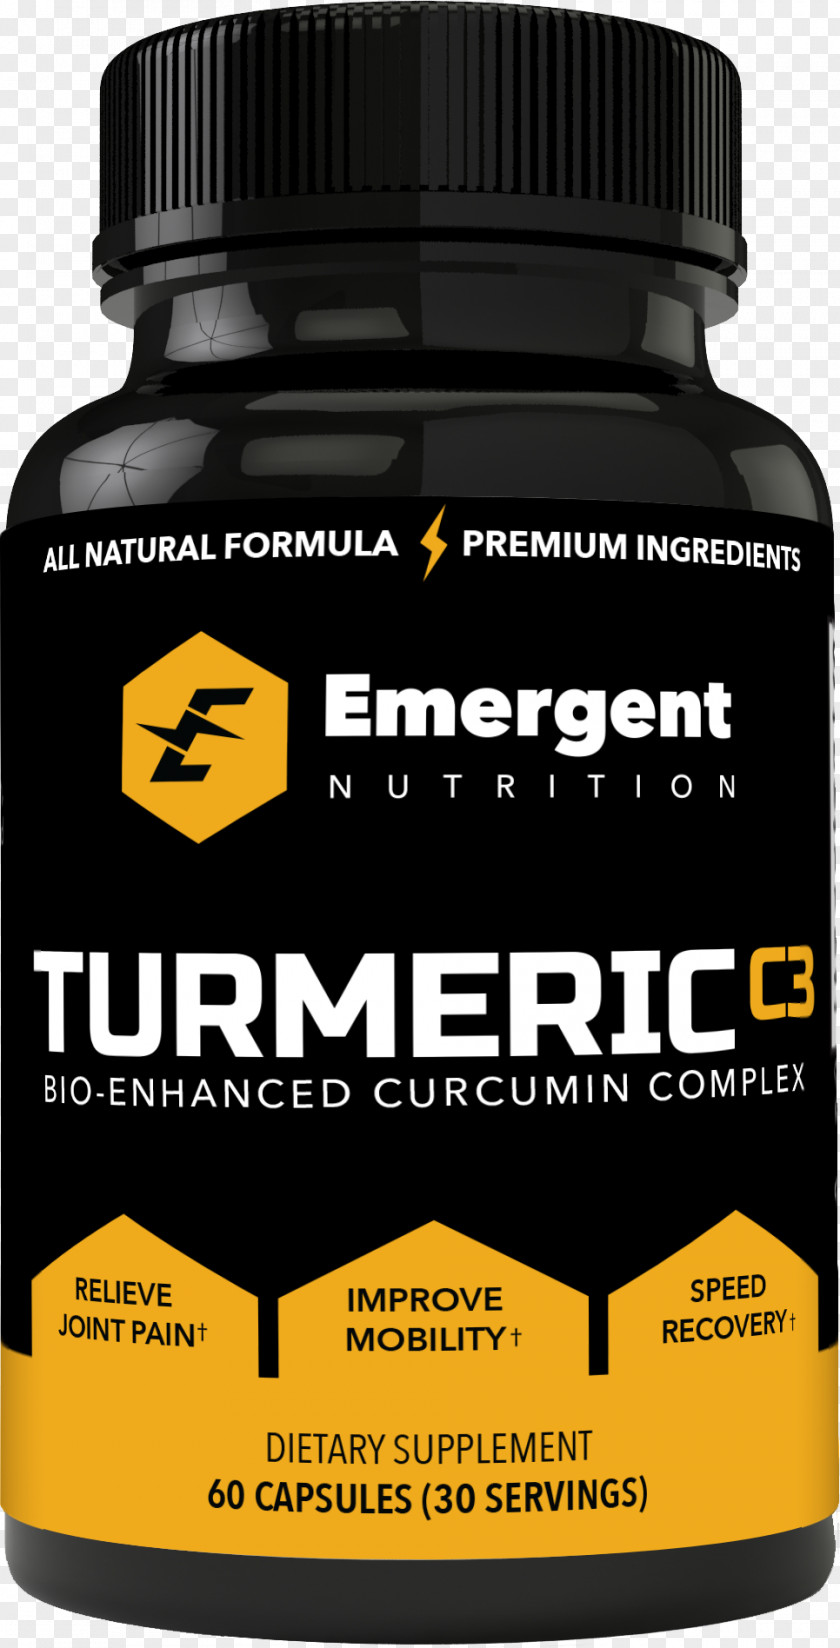 Termeric Dietary Supplement Fat Emulsification Weight Loss Adipose Tissue PNG